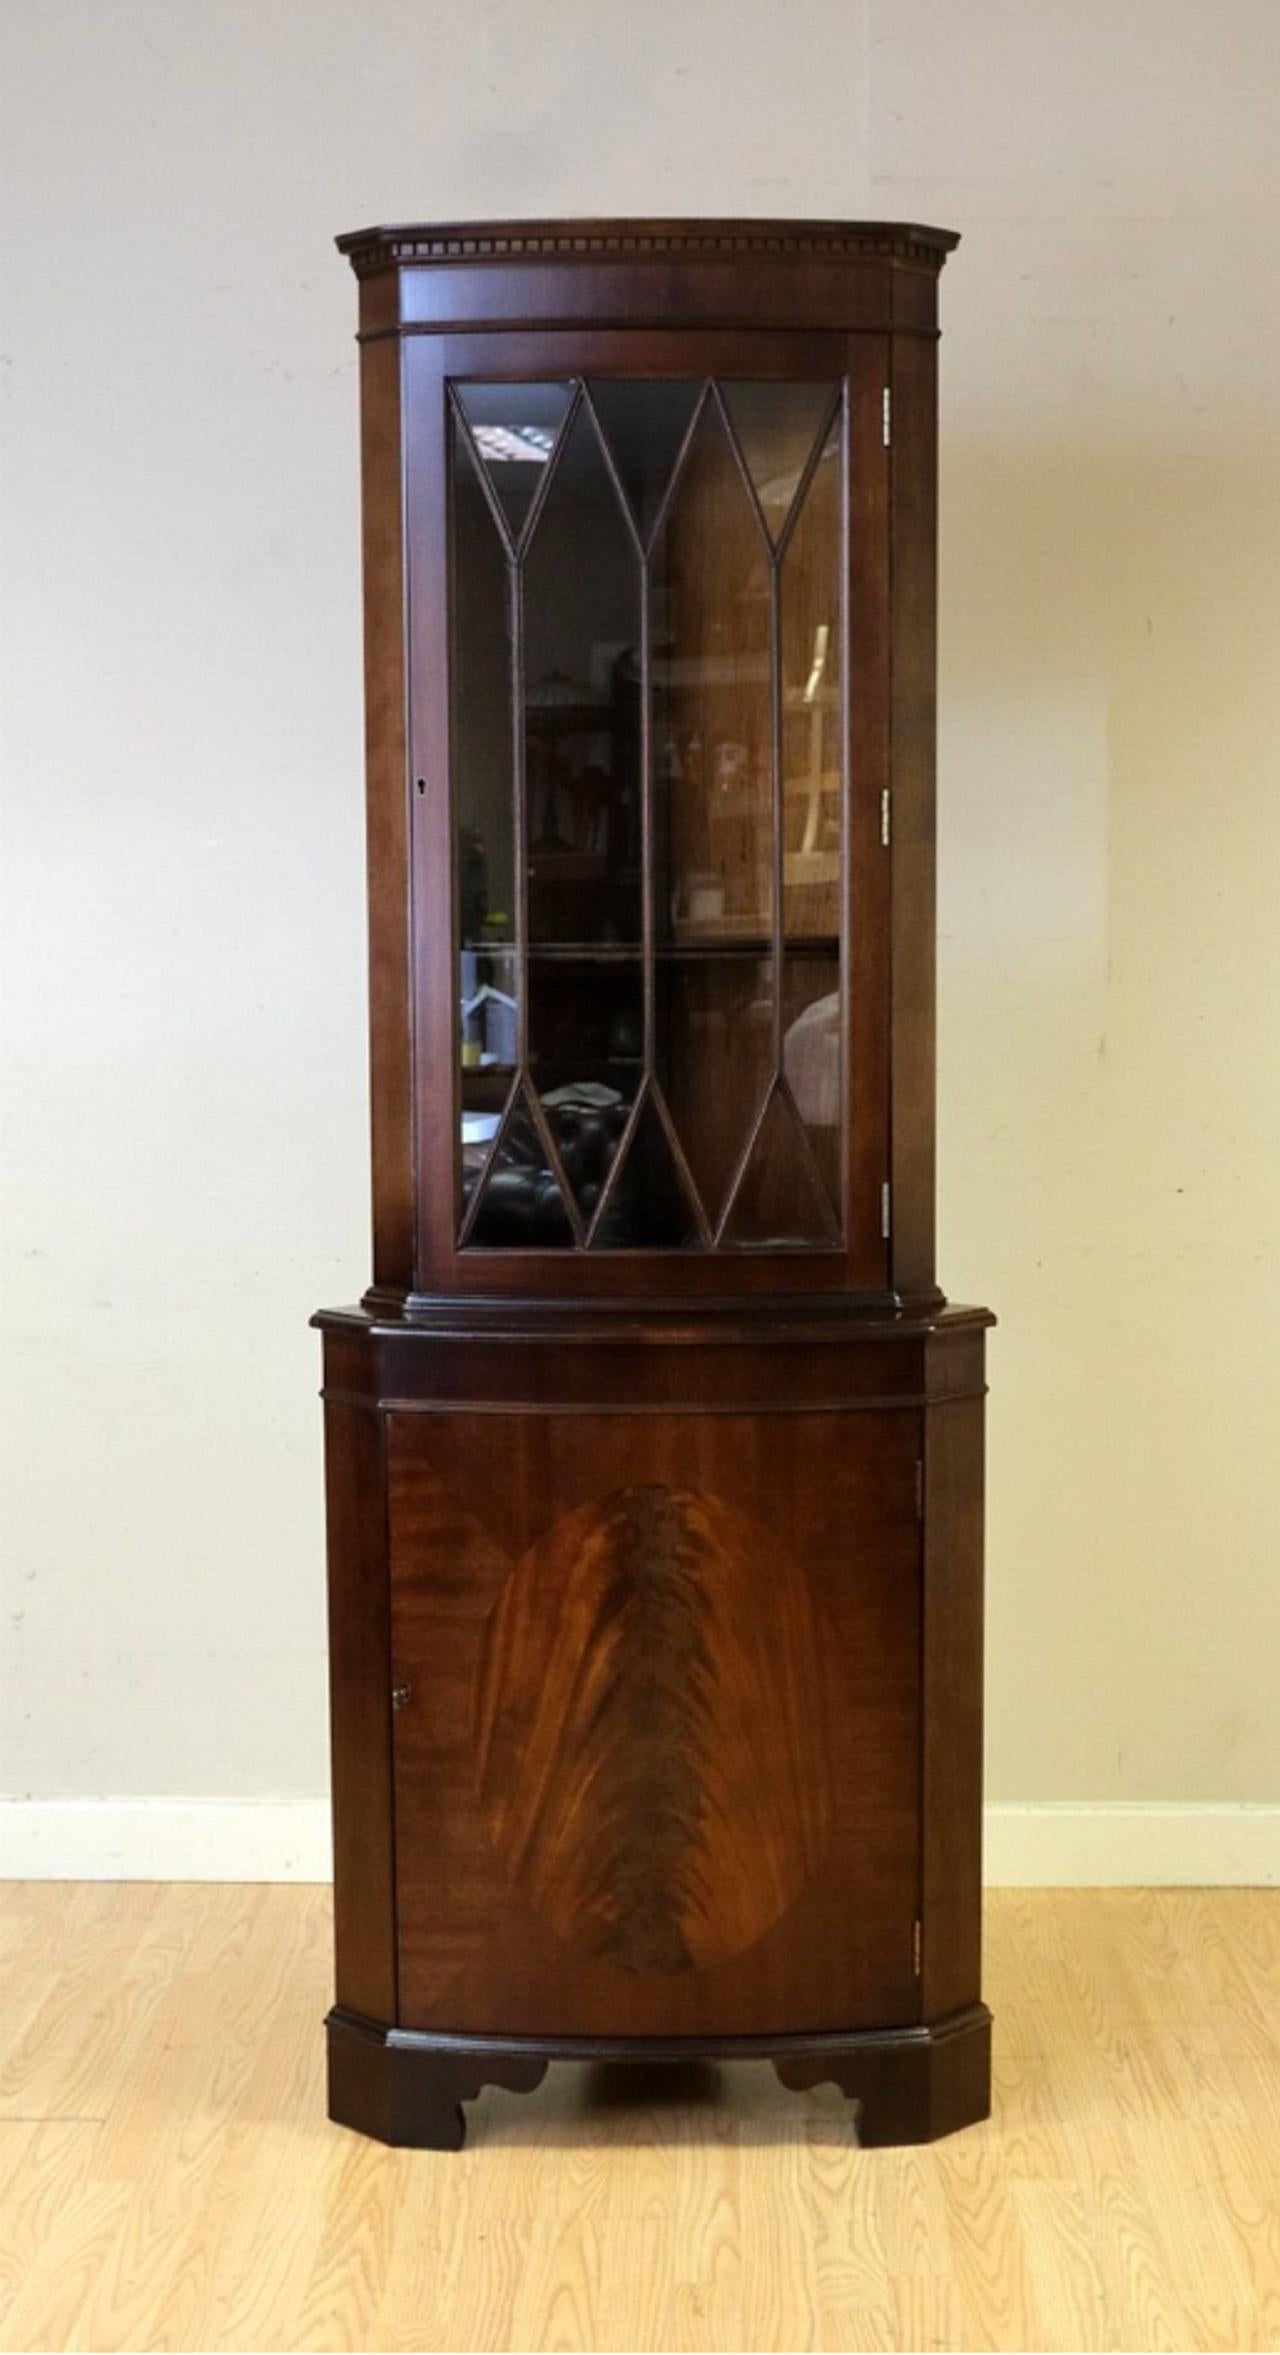 We are delighted to offer for sale this lovely Bevan Funnell Mahogany corner cabinet with glass front door. 

This elegant bow-fronted corner cabinet is ideal for small spaces as it doesn't use much space. The dentil molding on the top cornice